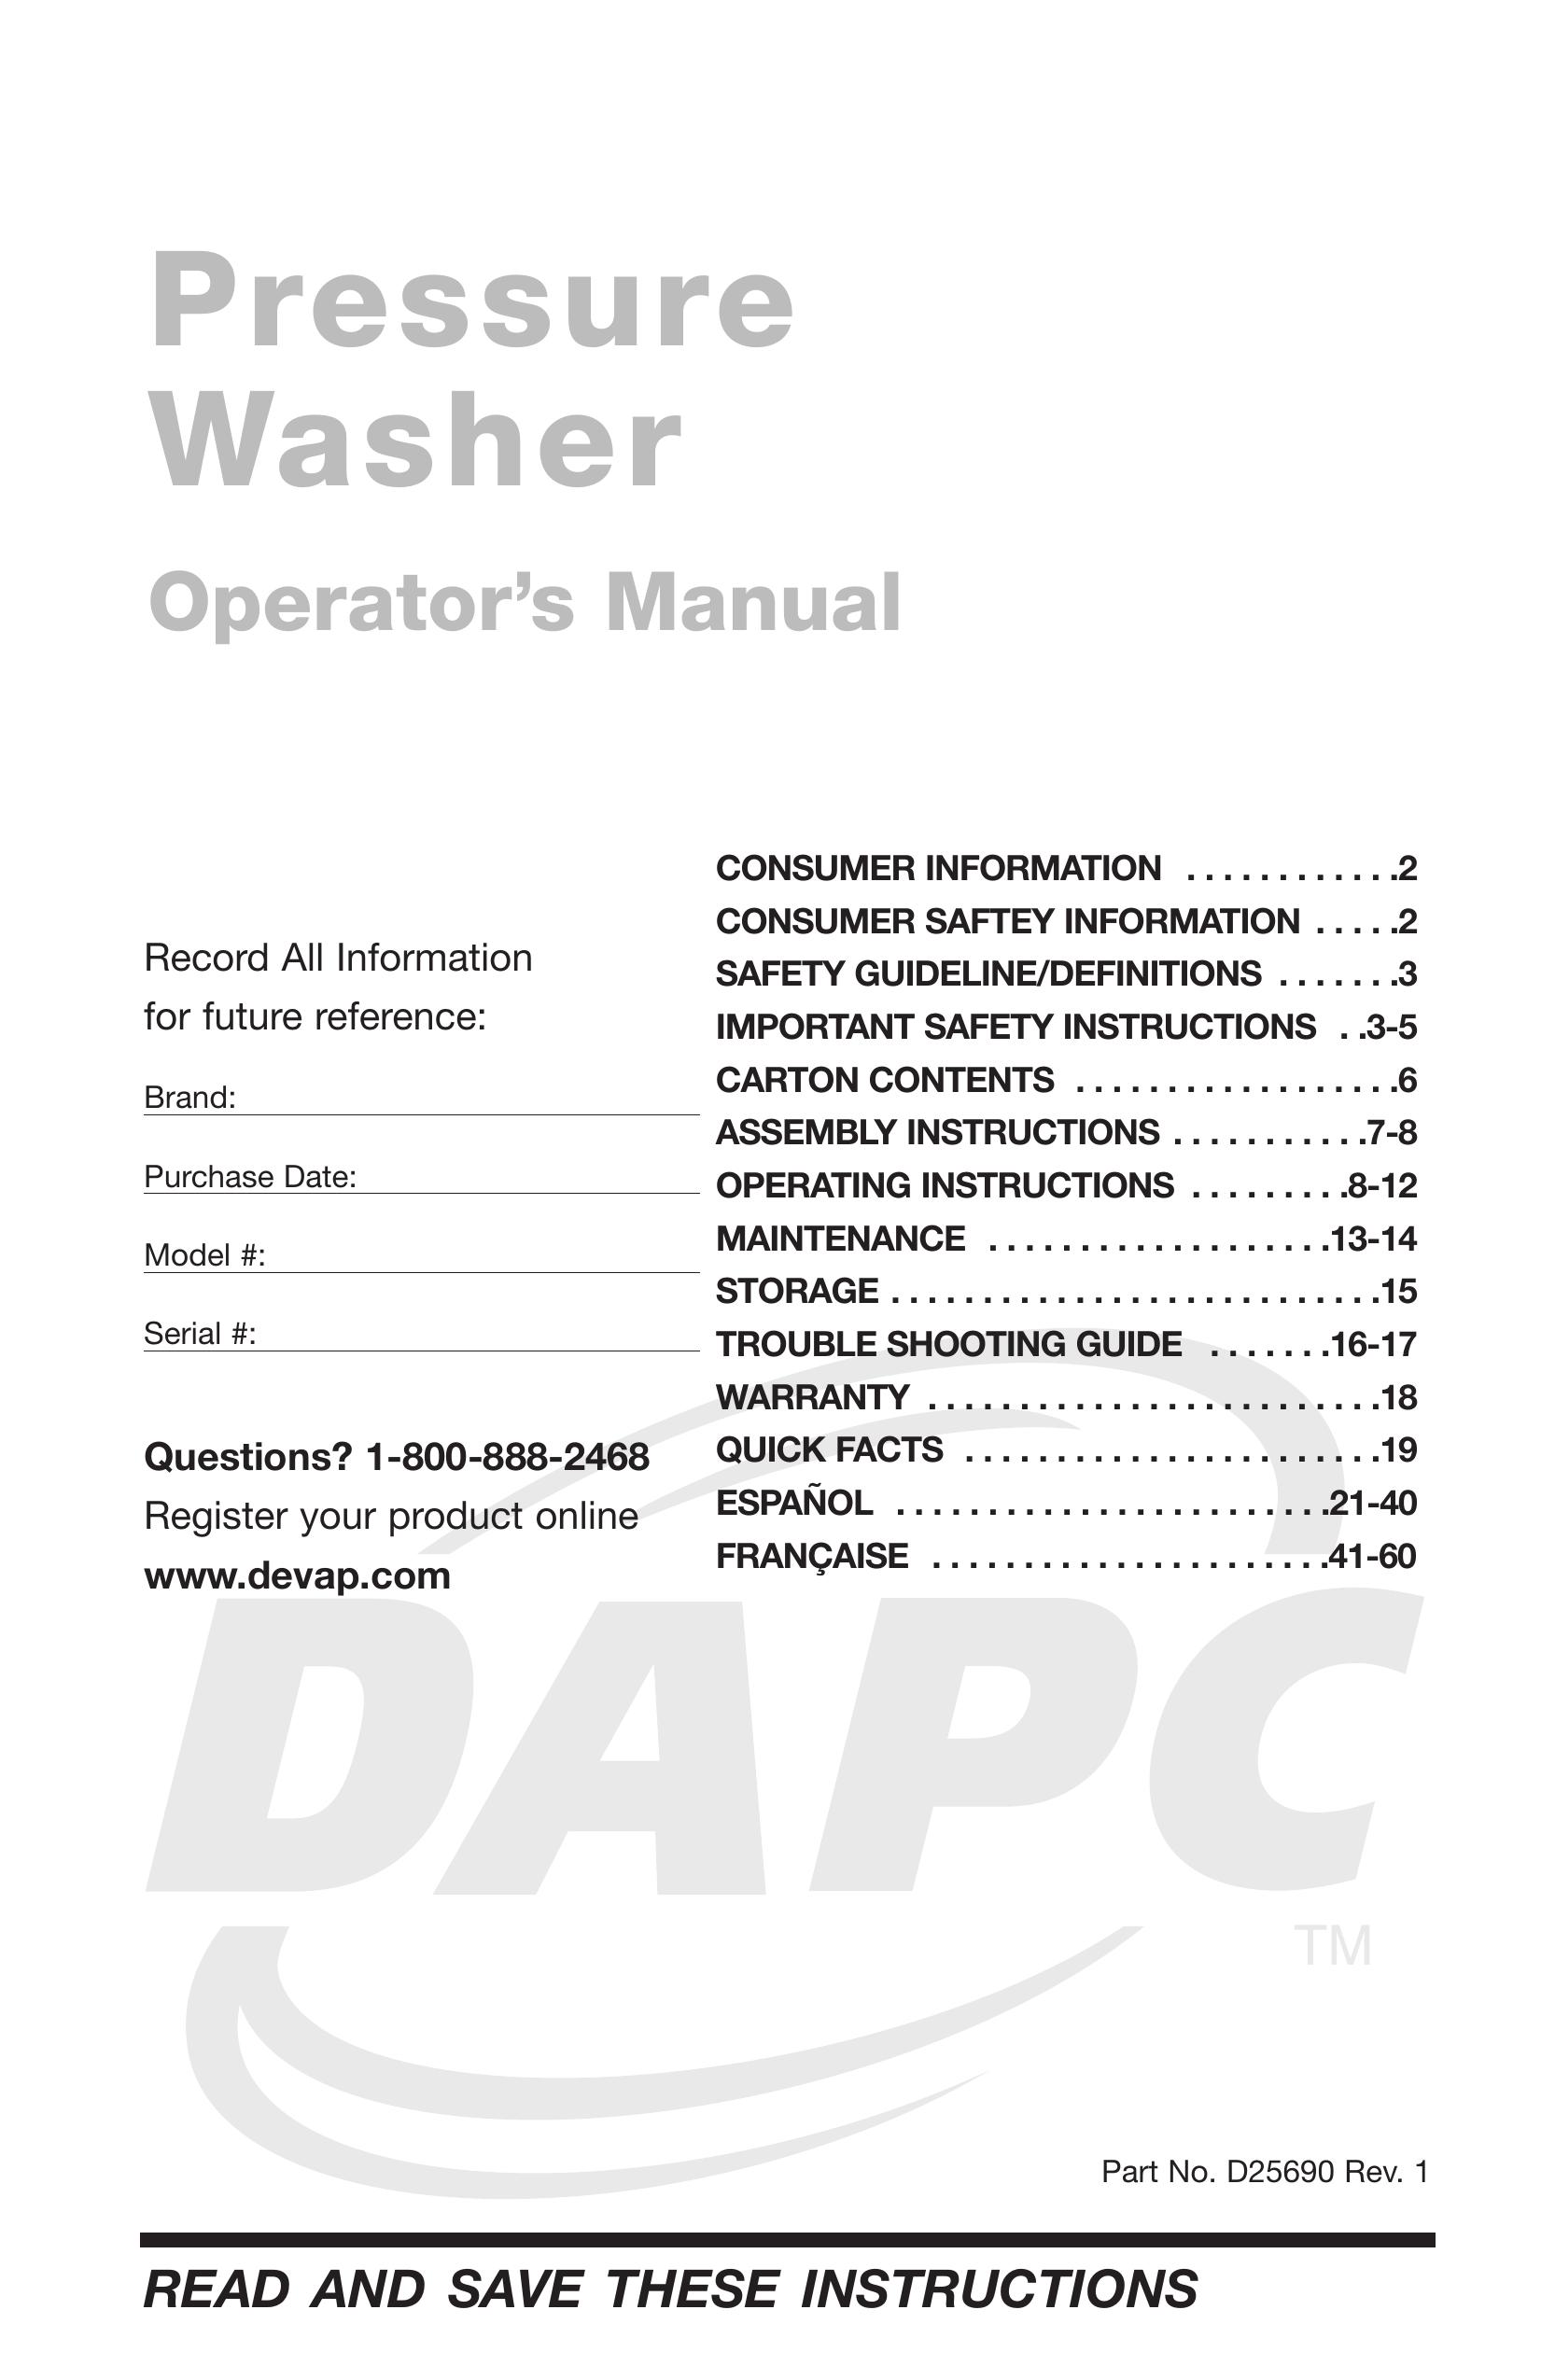 DeVillbiss Air Power Company D25690 Pressure Washer User Manual